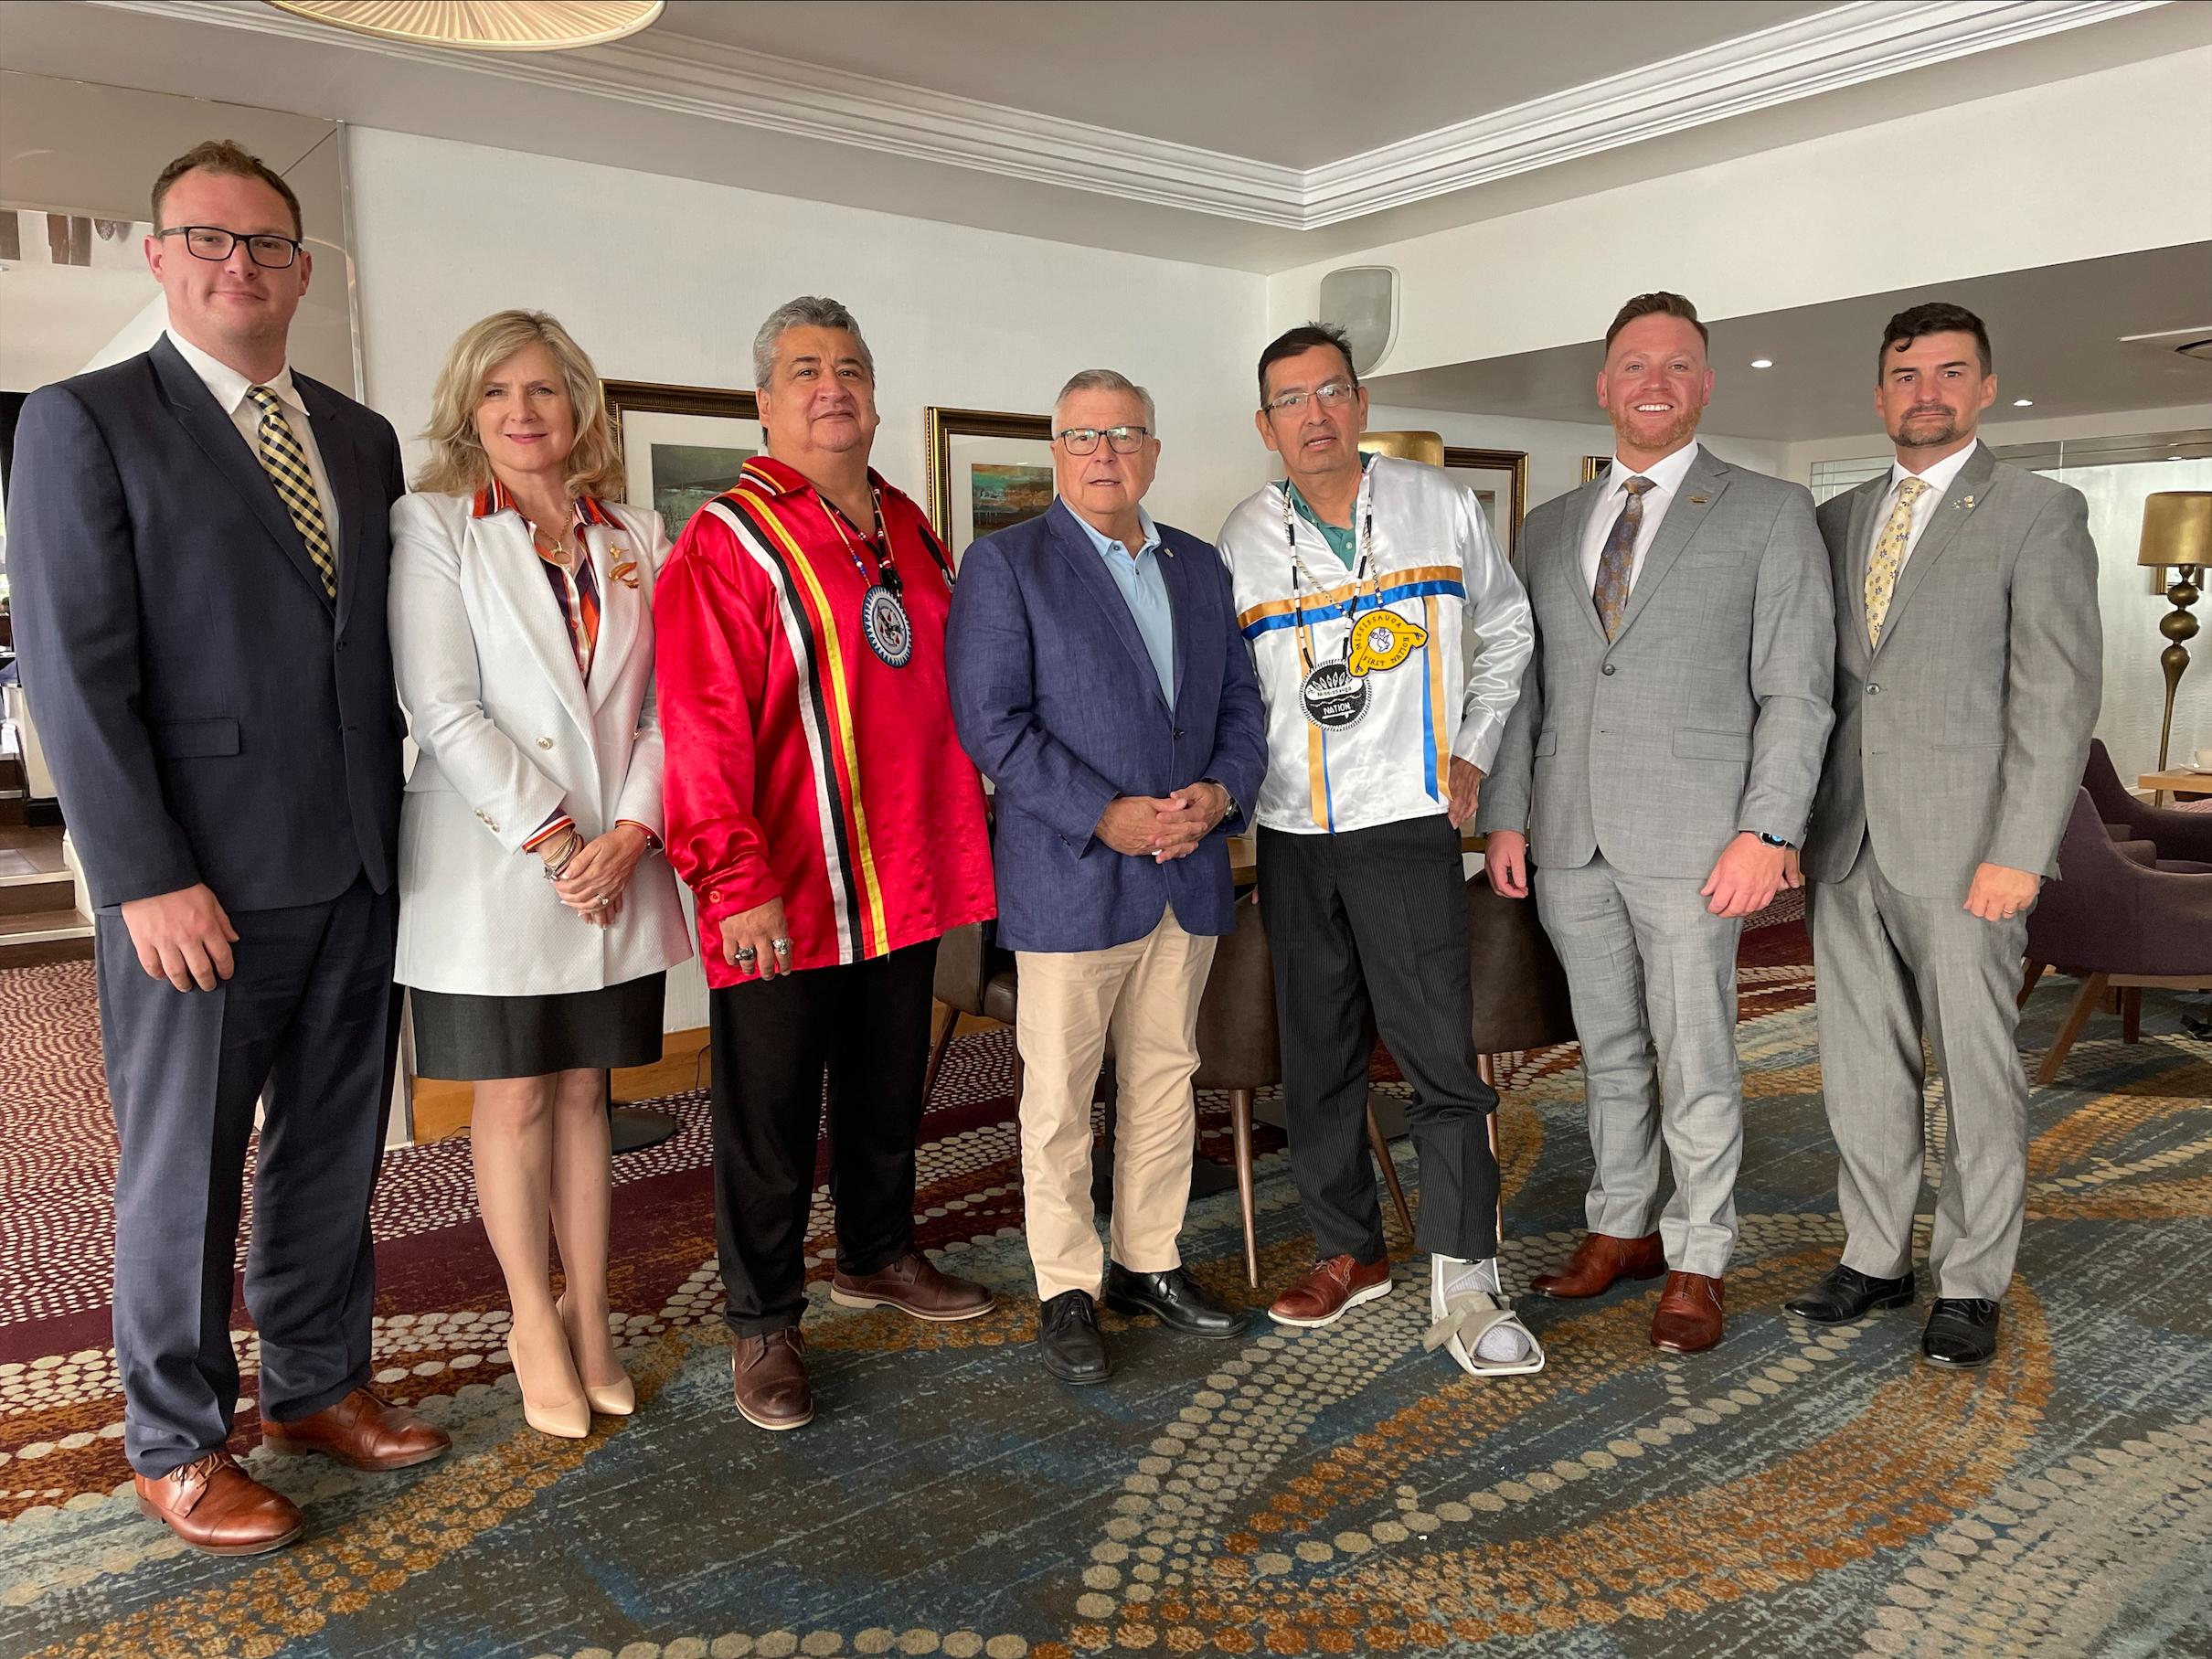 Left to Right: Veronica Low (on behalf of the Steven Low Foundation), Chad Cowie (Assistant Professor/from Pamitaashkodeyong/Hiawatha First Nation), Gimaa (Chief), Stacey Laforme (Mississaugas of the Credit First Nation), Ralph Goodale (High Commissioner for Canada to the United Kingdom), Gimaa (Chief), Bob Chiblow (Mississauga First Nation) Steve Tom’s (Elected Councillor for O’Shkiigmong/Curve Lake First Nation), Nathan Tidridge (Vice President of the Institute for the Study of the Crown in Canada)